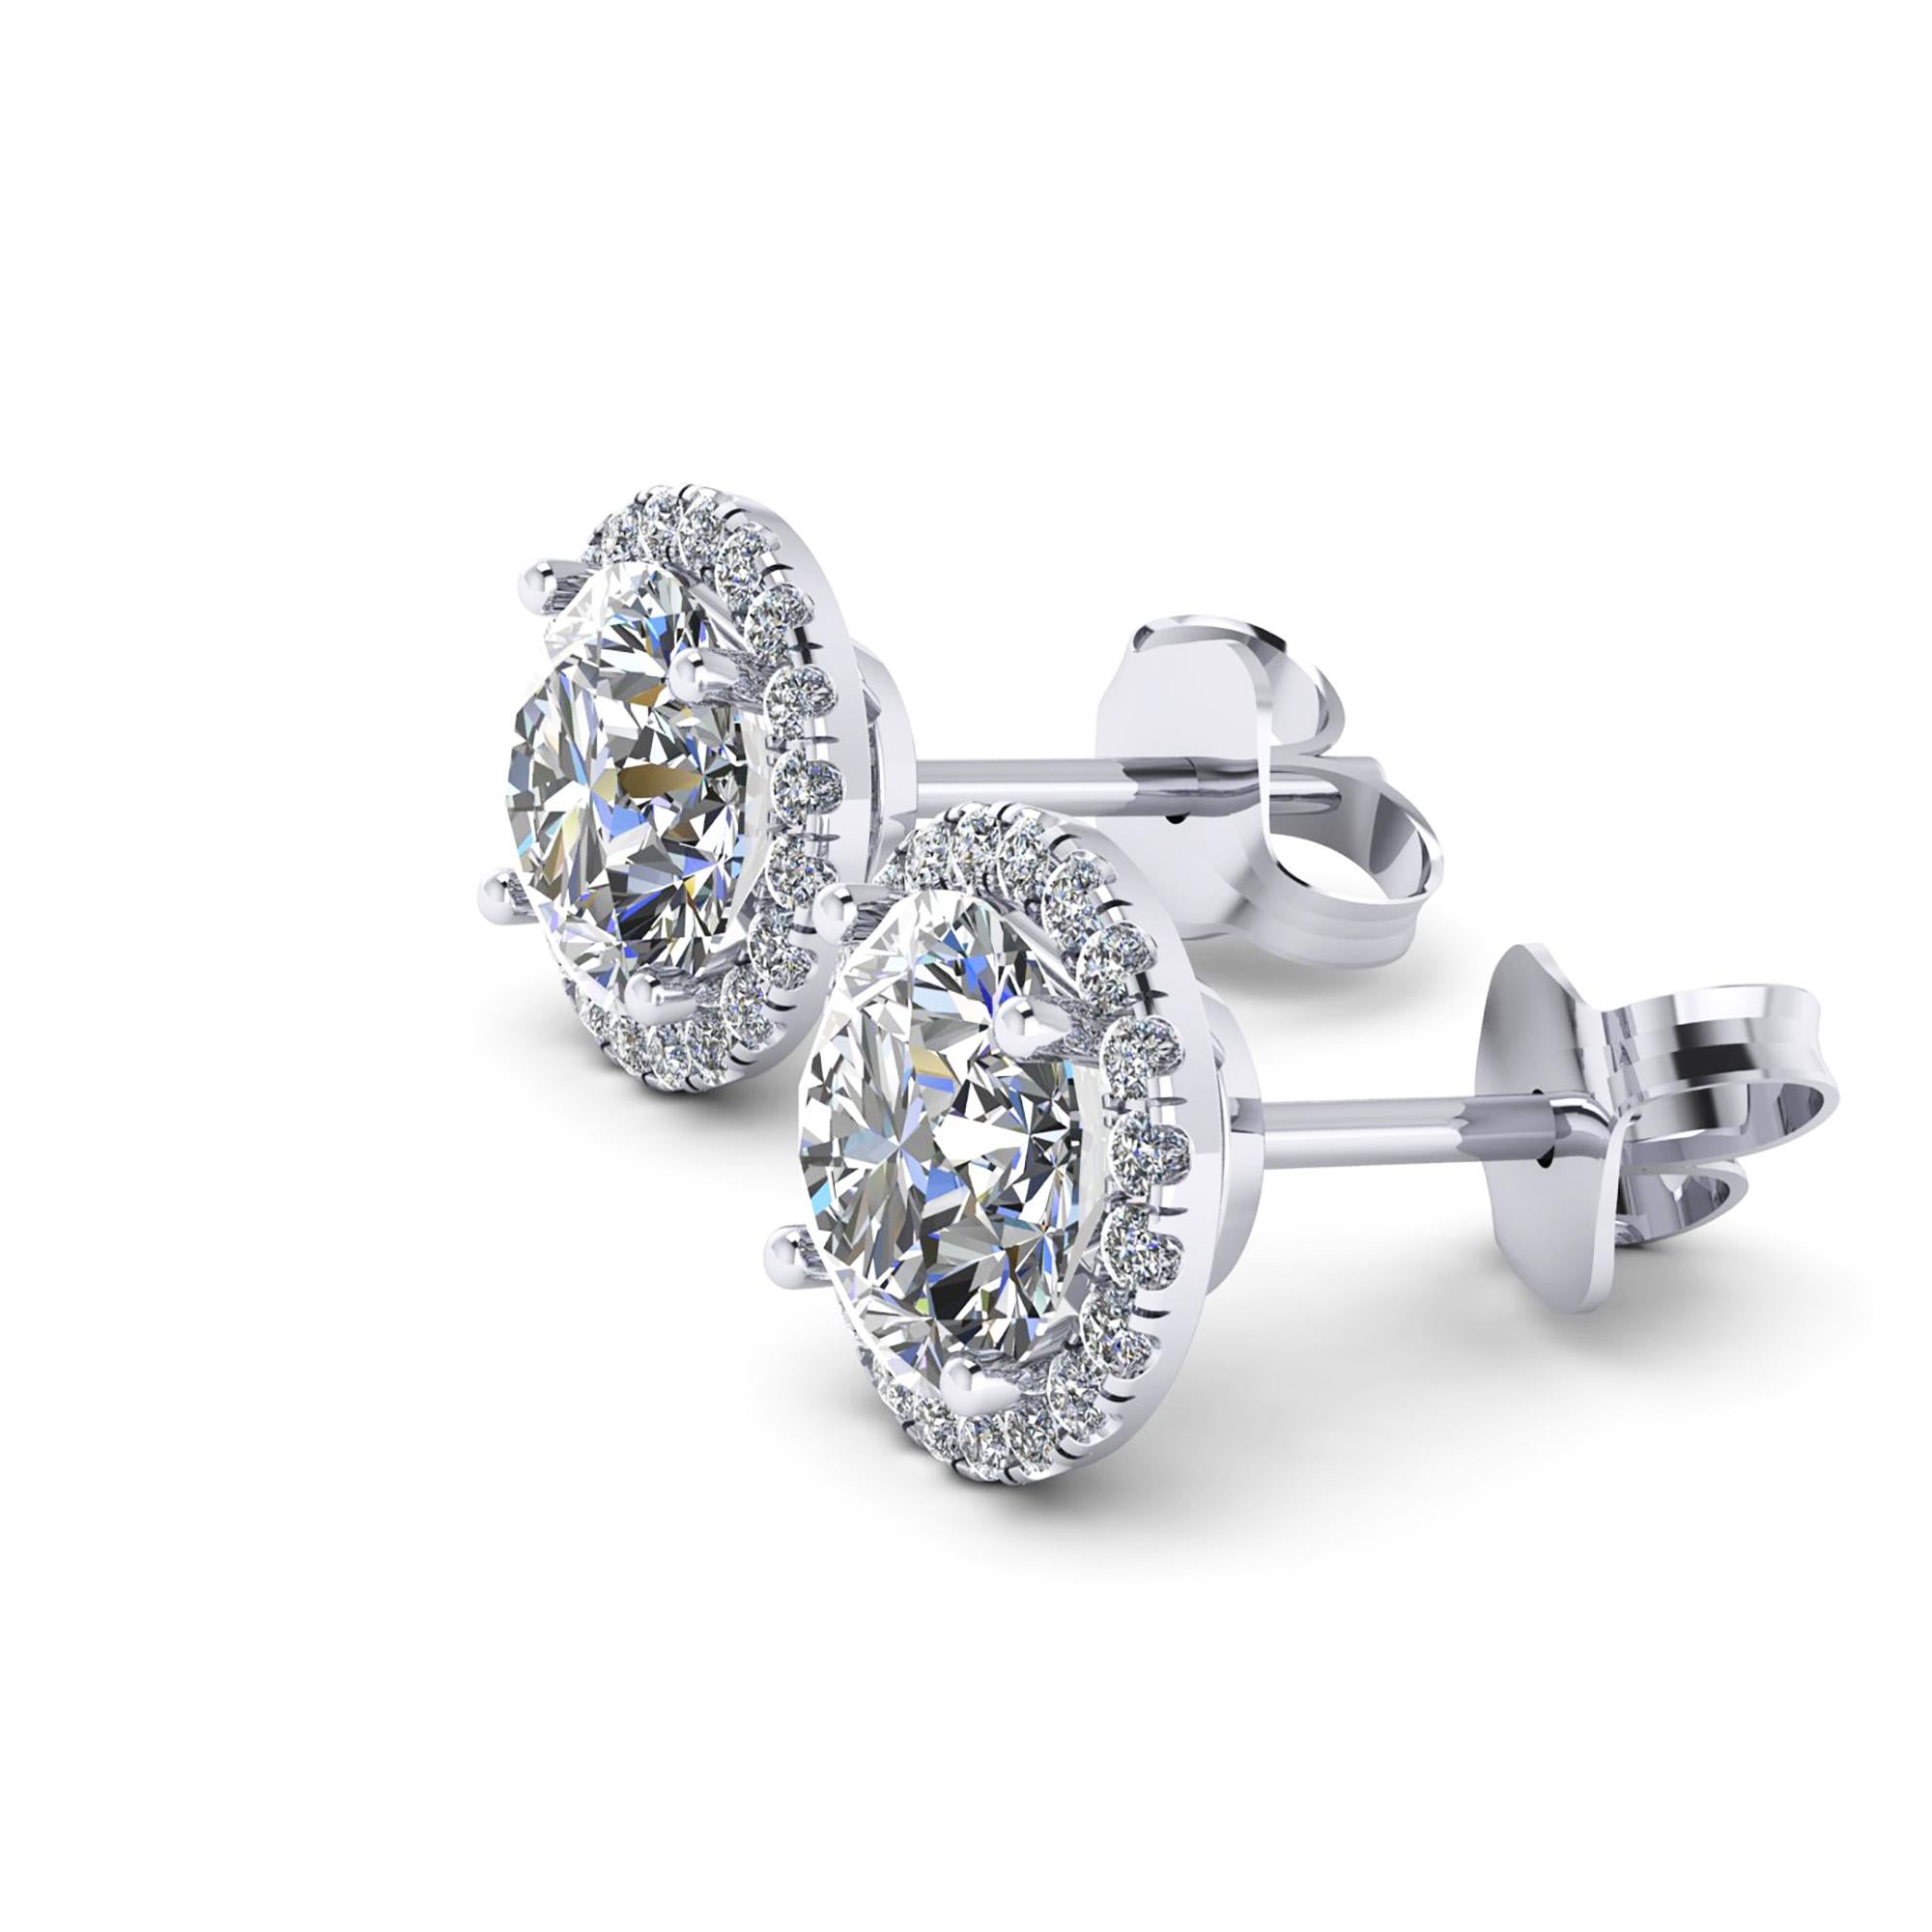 GIA Certified 2.26 Carat Diamond Halo Studs earrings hand made in Platinum in New York City with the best Italian craftsmanship
two brilliant round diamonds, G color, IF internally flawless of 1.06 carat and 1.05 carat, GIA Certificate accompany the